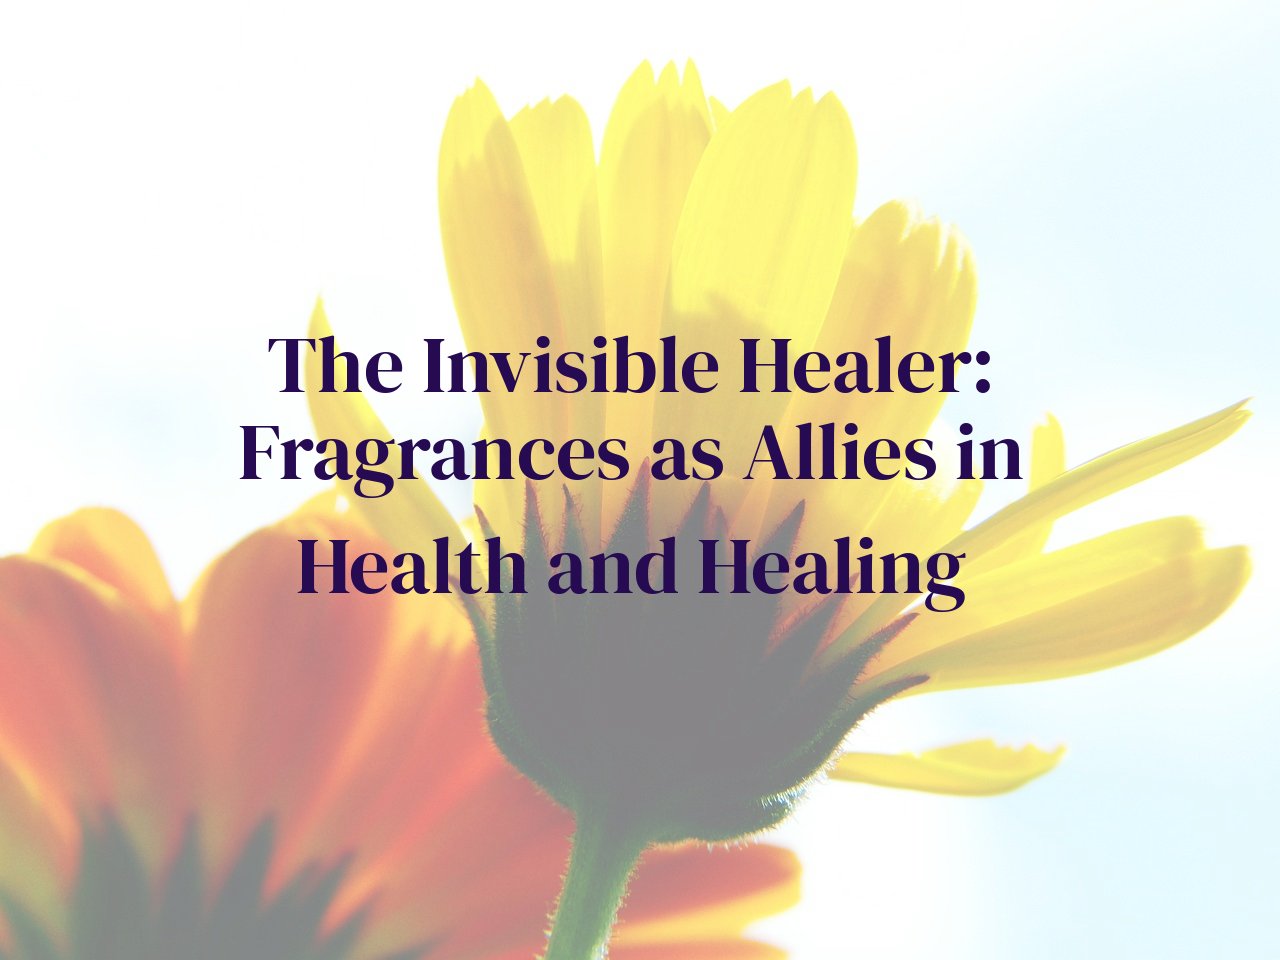 The Invisible Healer: Fragrances as Allies in Health and Healing